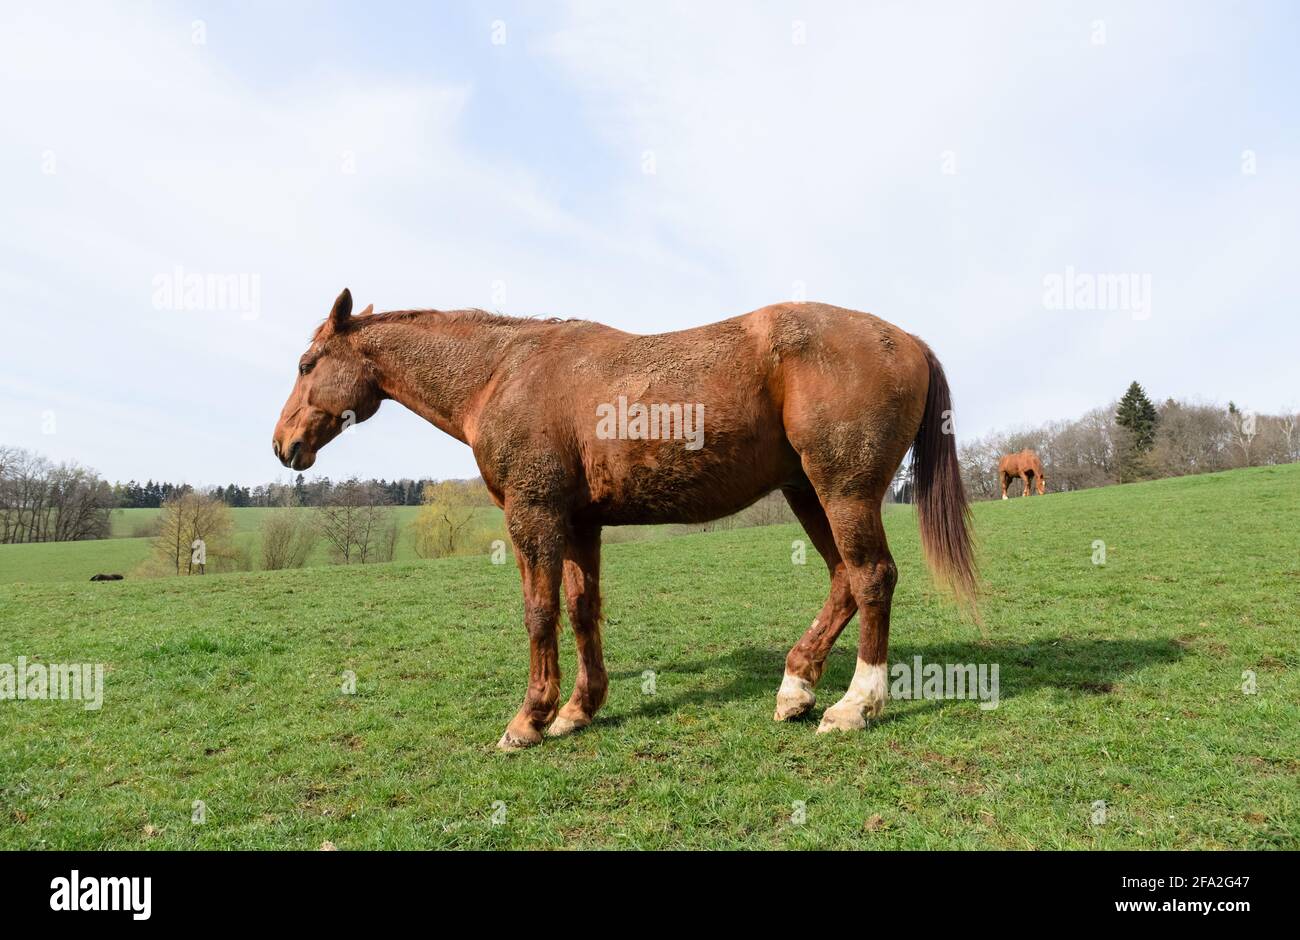 Domestic horse (Equus ferus caballus) standing on a pasture in the countryside, dozing with eyes closed, Germany, Europe Stock Photo